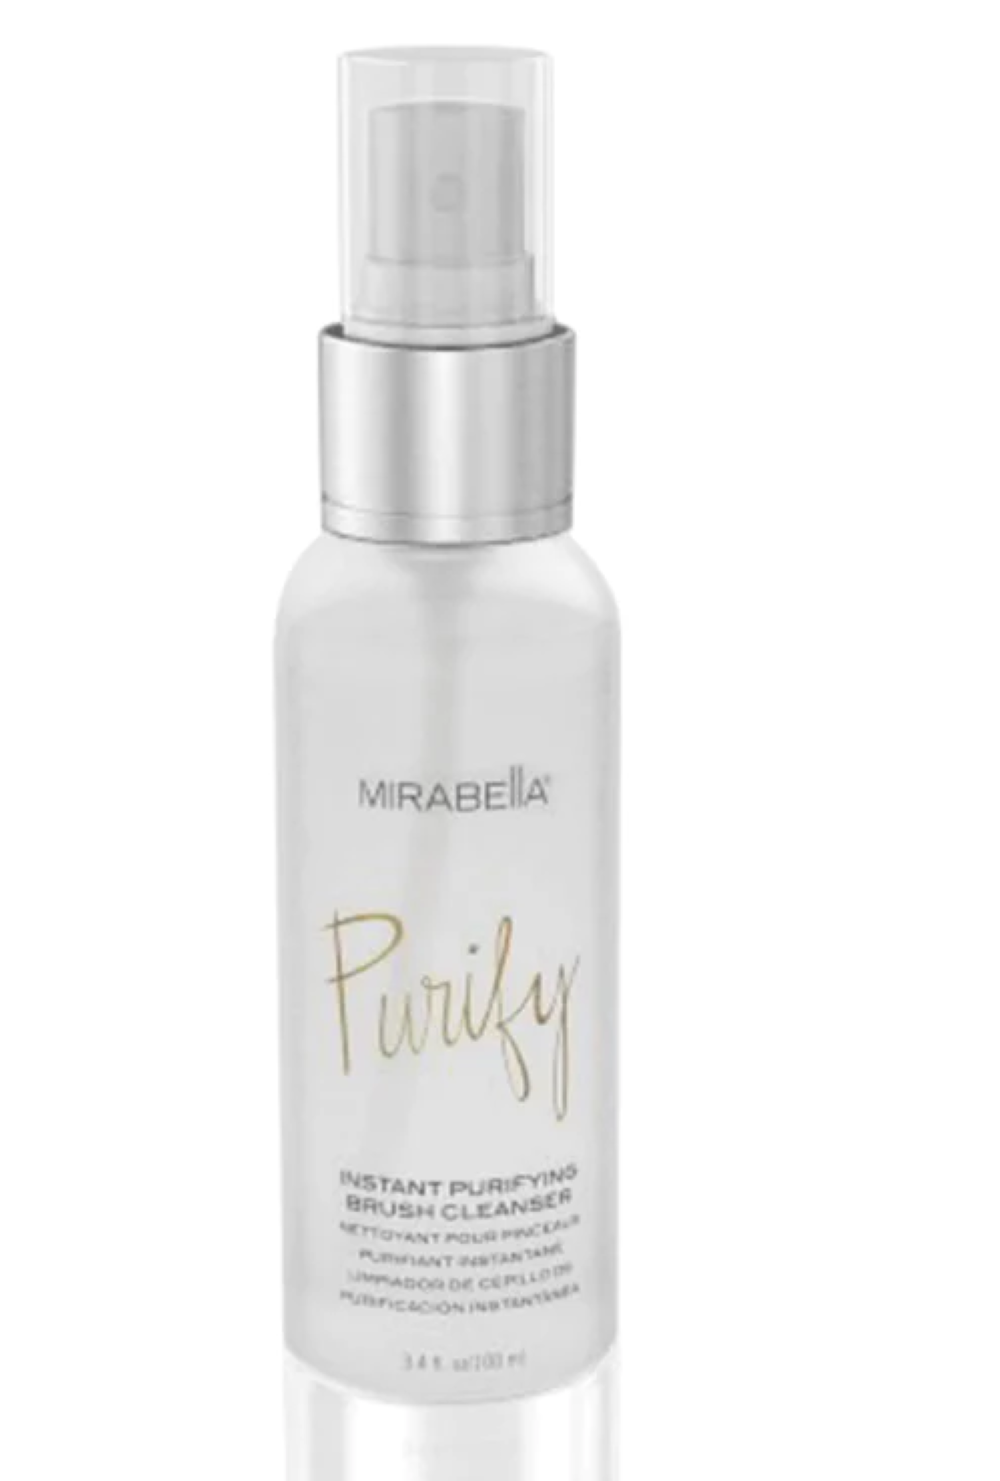 Mirabella Purify Instant Purifying Brush Cleanser, 3.4 fl oz - $18.00